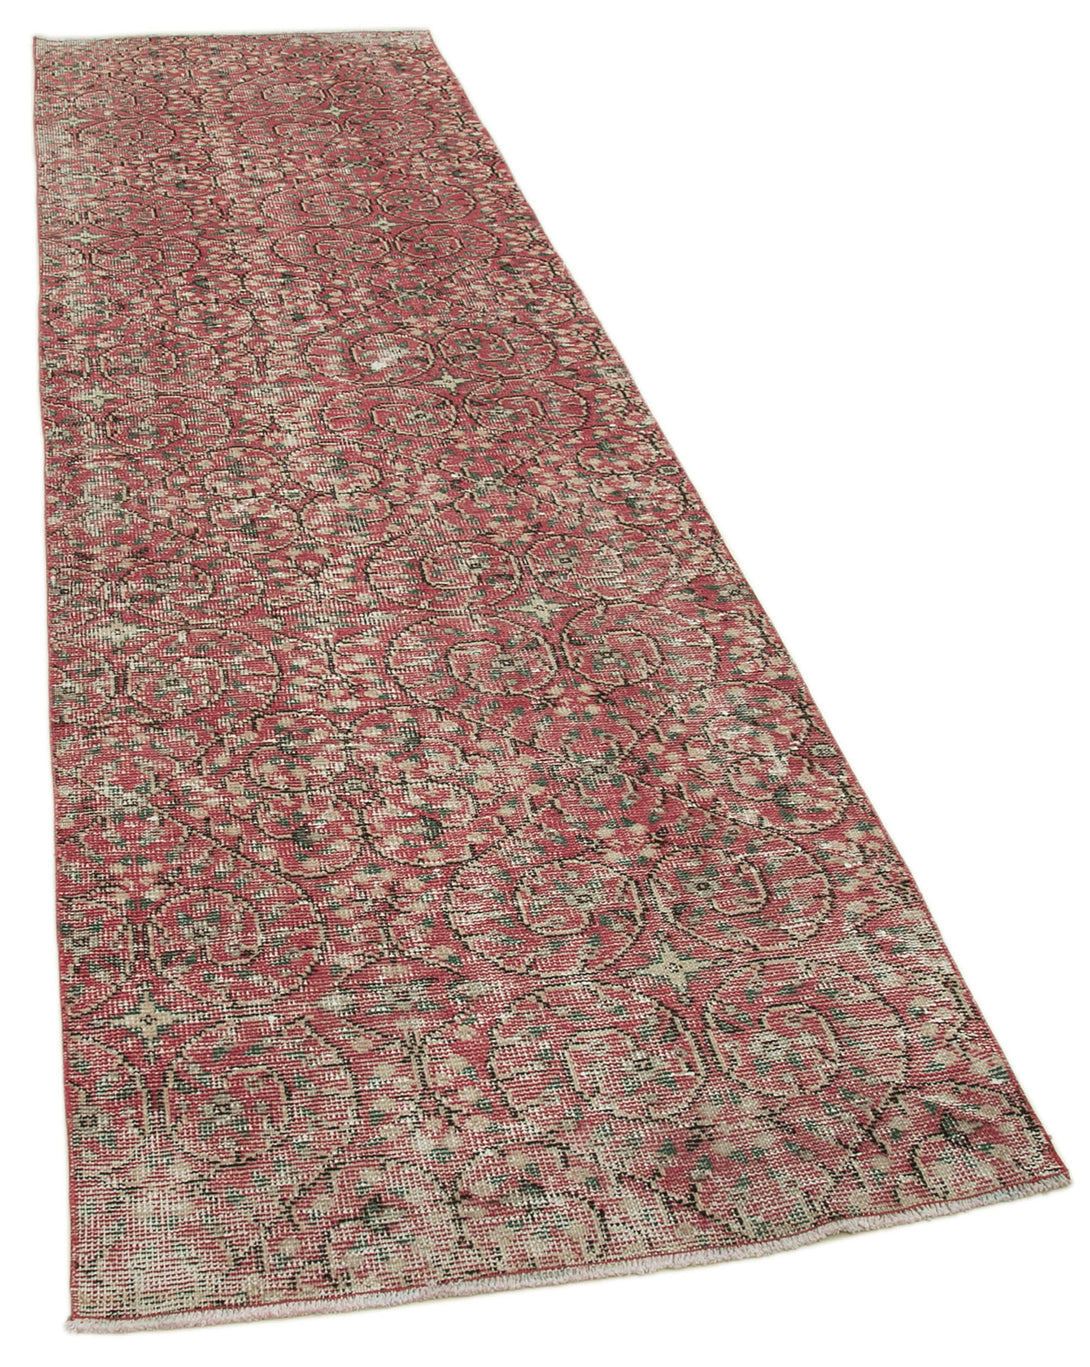 Handmade Overdyed Runner > Design# OL-AC-37179 > Size: 2'-11" x 10'-1", Carpet Culture Rugs, Handmade Rugs, NYC Rugs, New Rugs, Shop Rugs, Rug Store, Outlet Rugs, SoHo Rugs, Rugs in USA